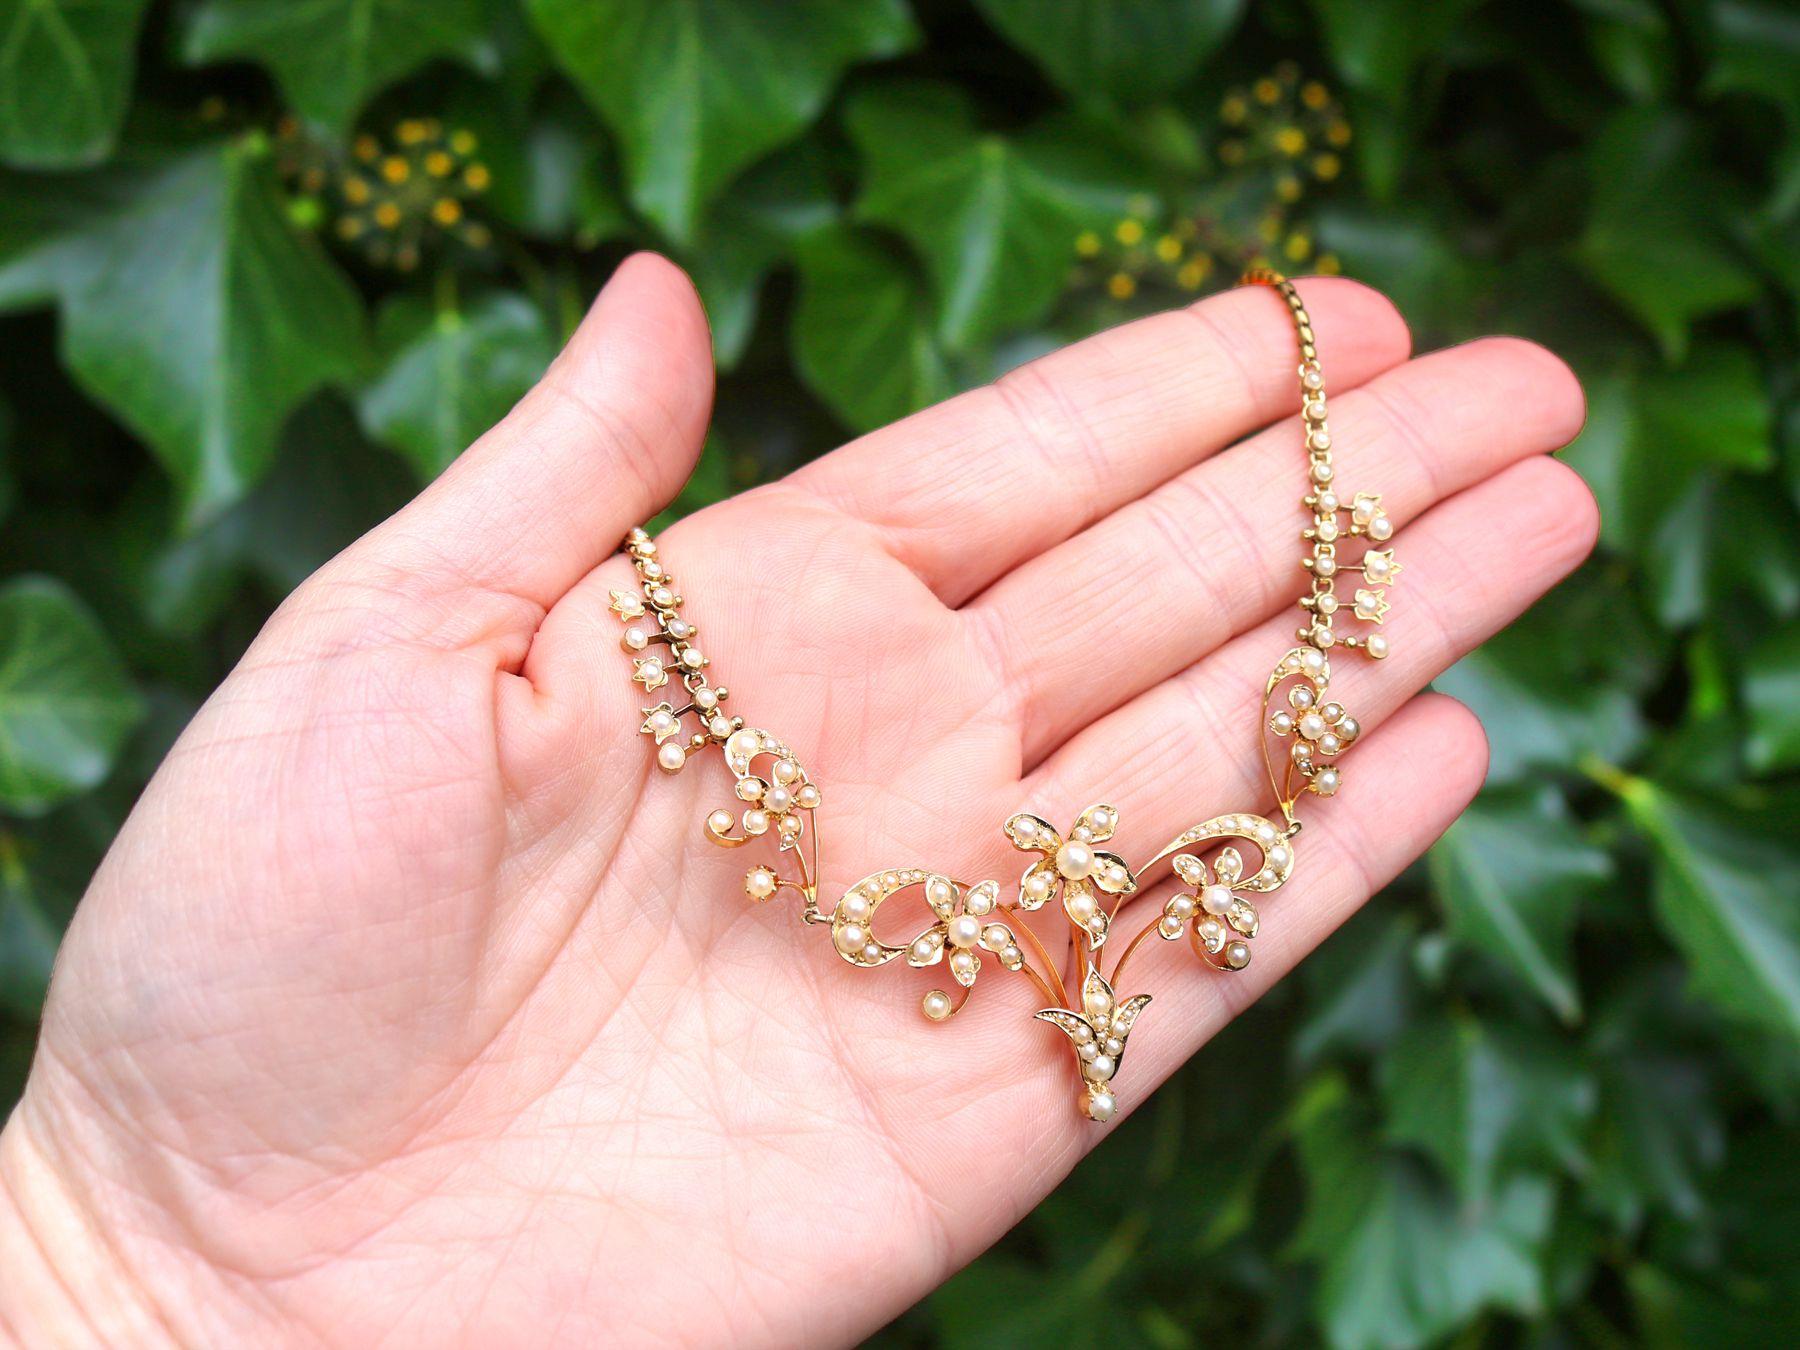 A fine and impressive antique seed pearl necklace in 15 karat yellow gold; part of our diverse antique jewelry and estate jewelry collections.

This fine and impressive antique pearl necklace has been crafted in 15k yellow gold.

This antique pearl